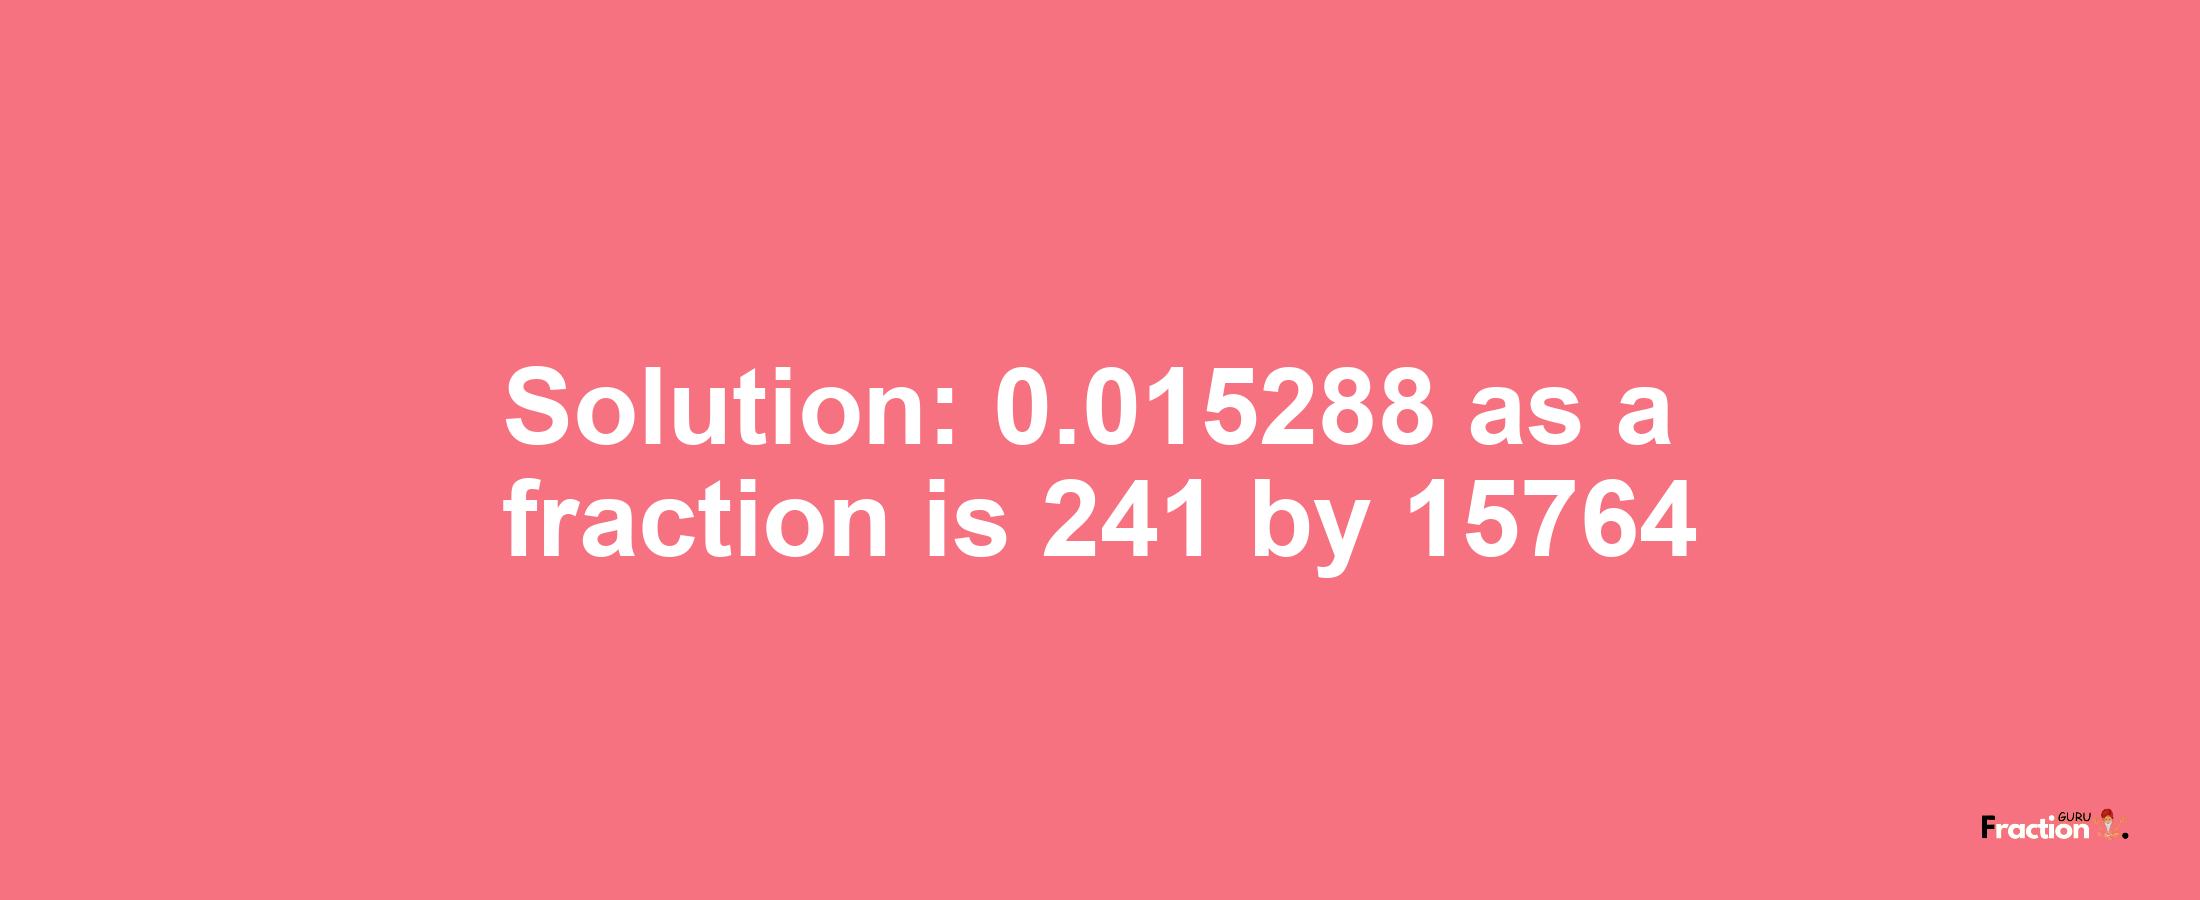 Solution:0.015288 as a fraction is 241/15764